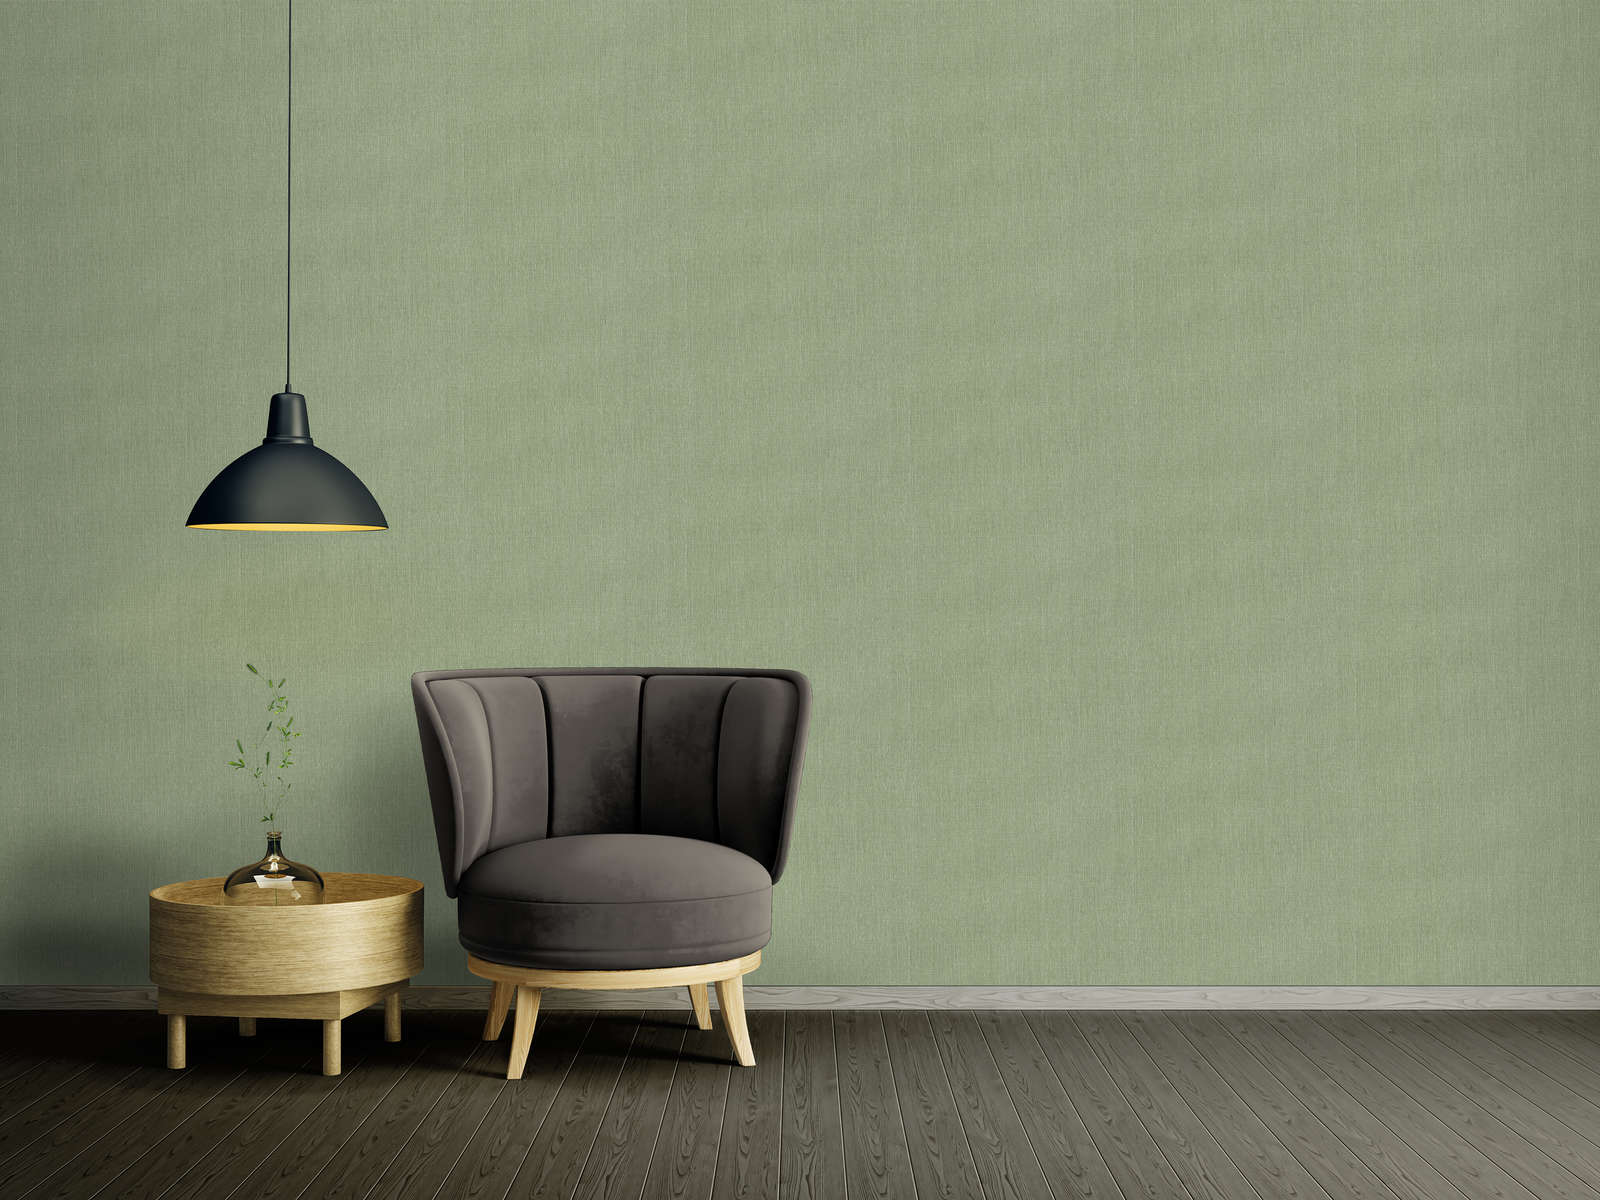             Lightly textured non-woven wallpaper in textile look - green
        